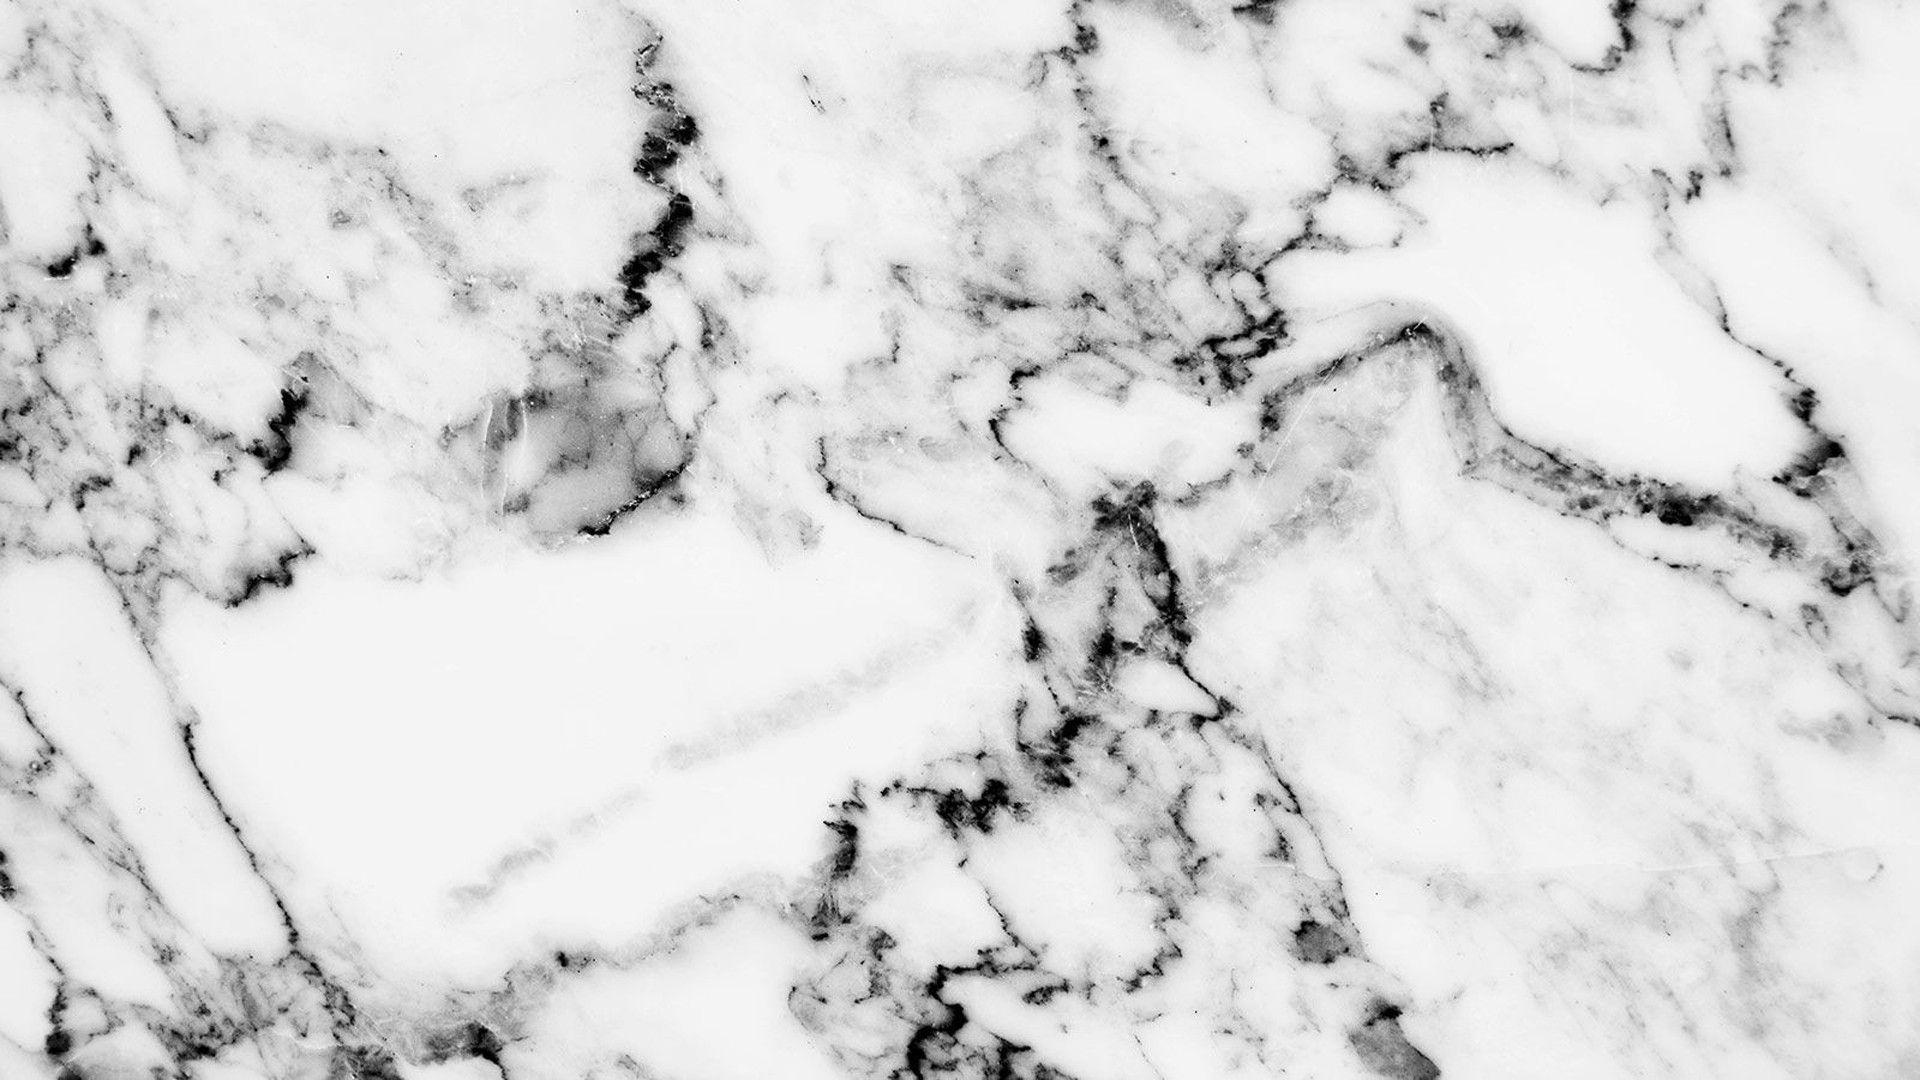 Black Marble HD Wallpapers - Top Free Black Marble HD Backgrounds